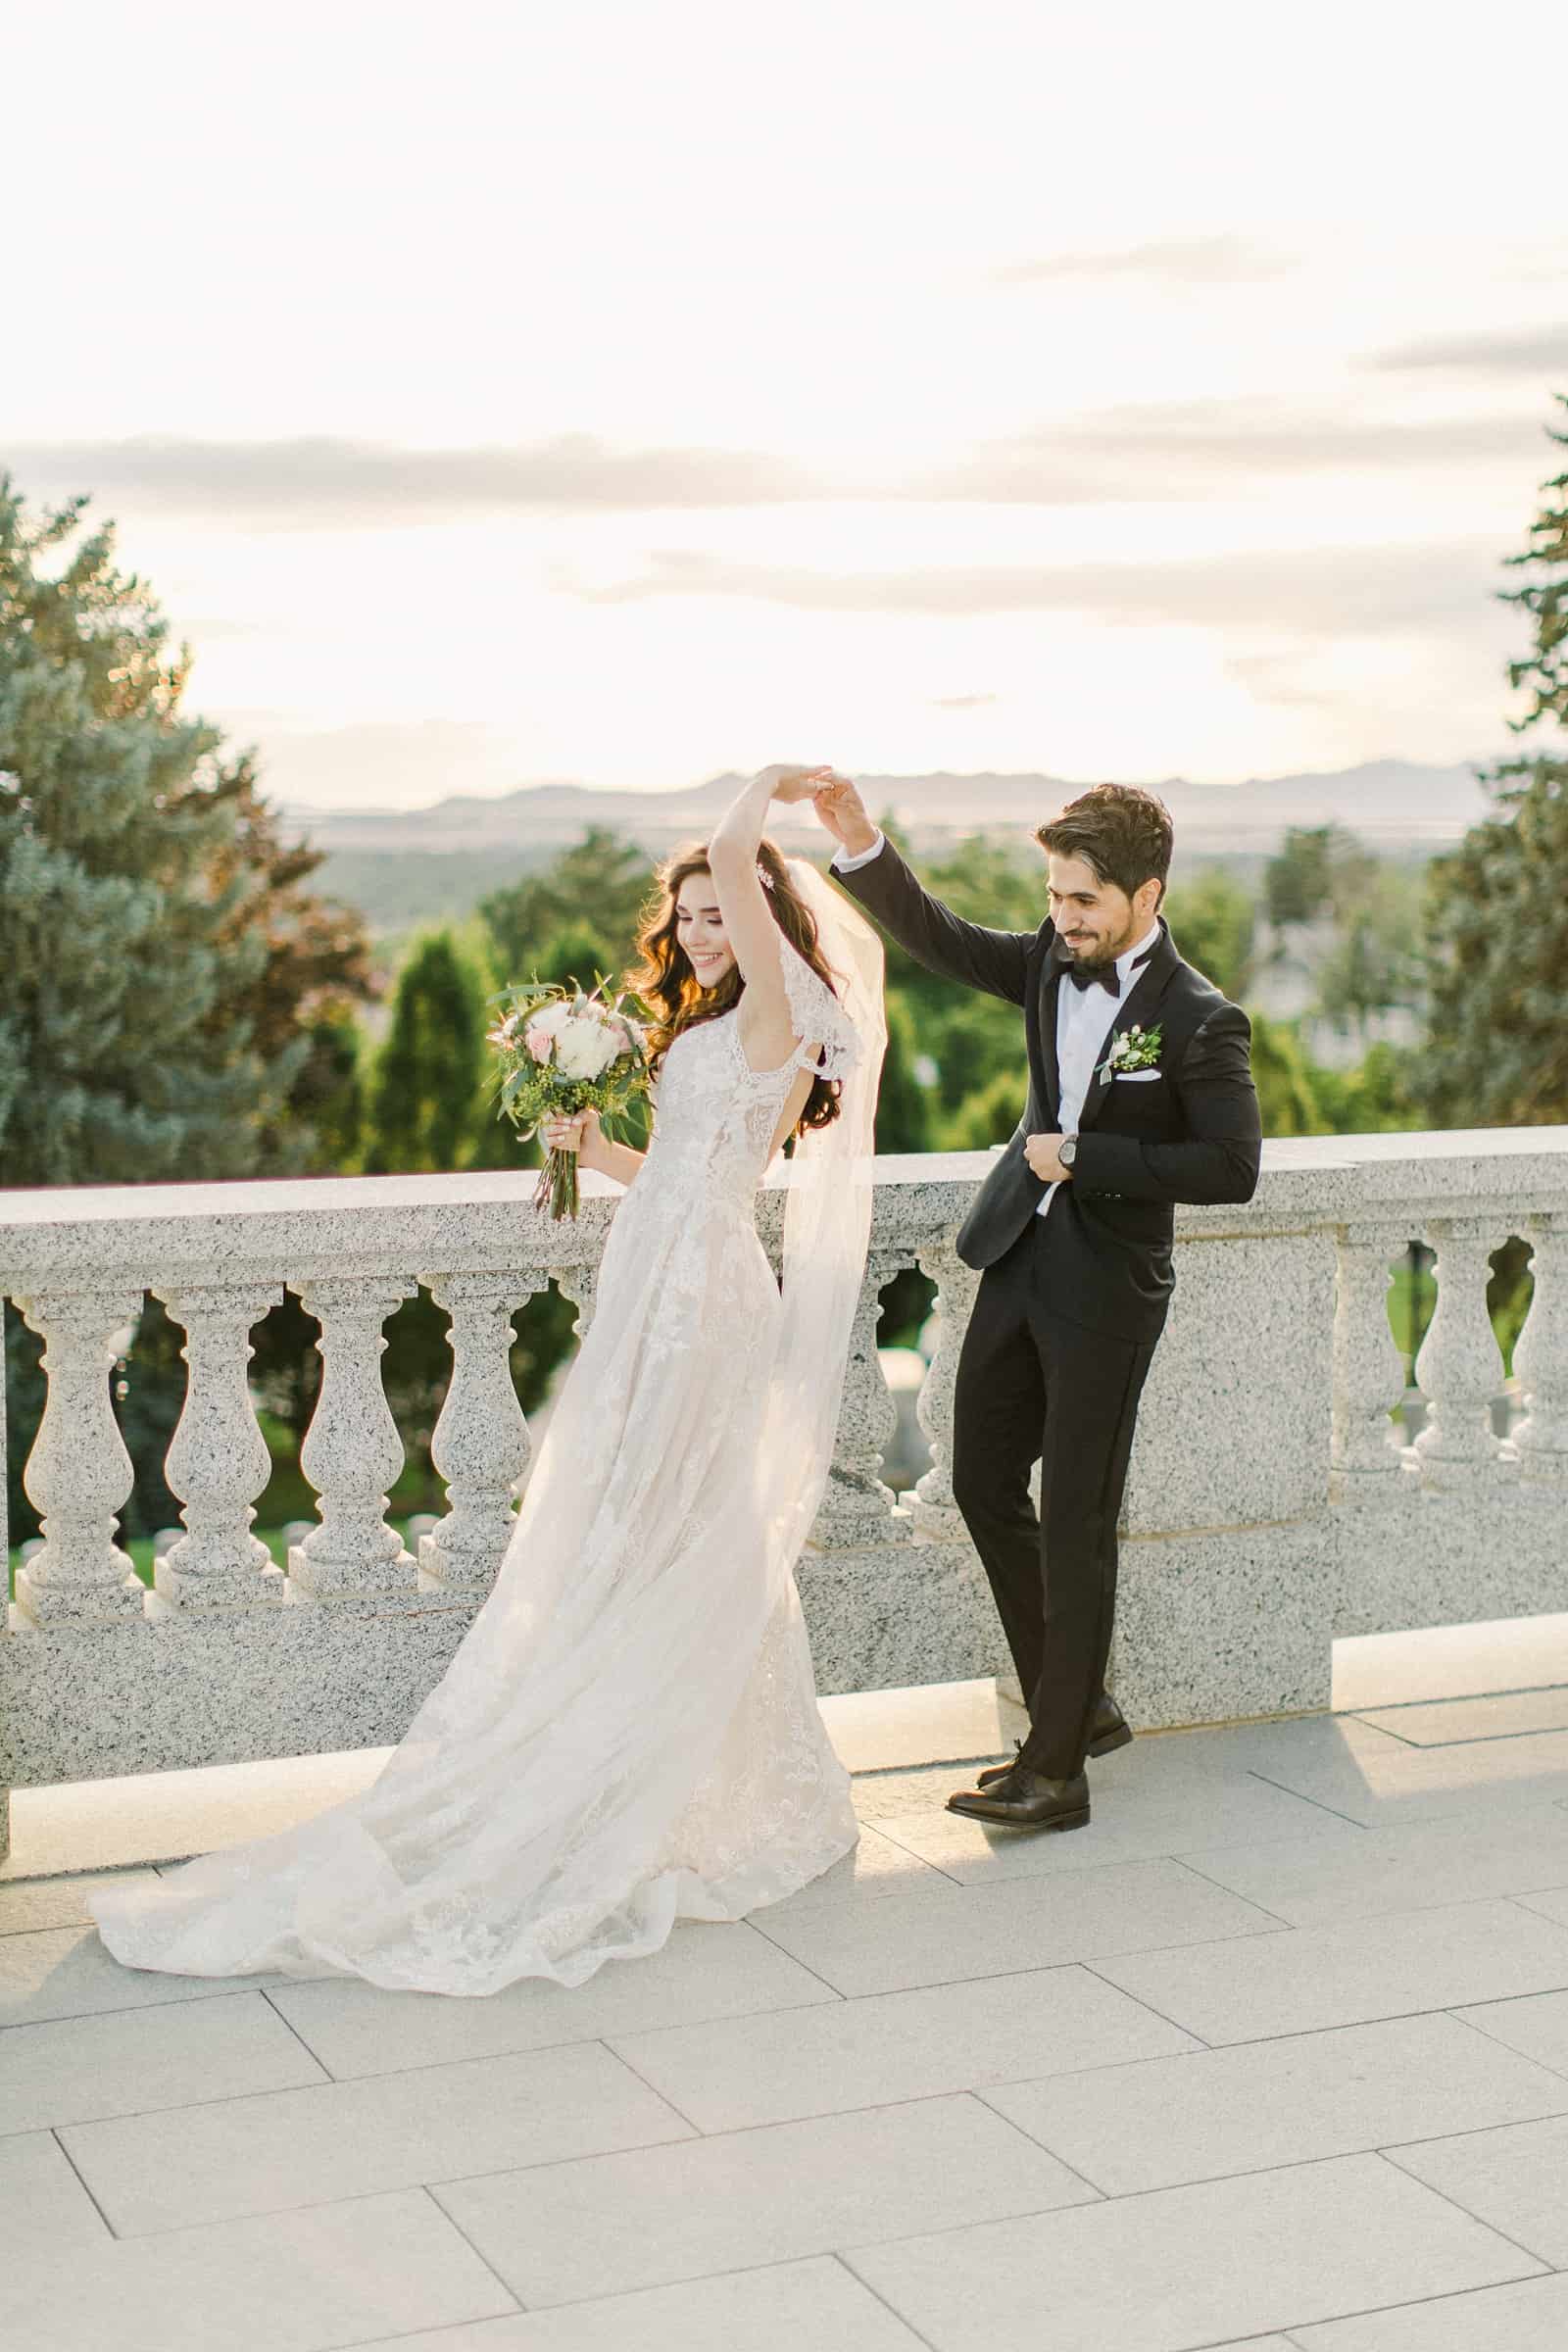 Palestinian Iranian Bride and Groom, Utah Wedding Photography at the Utah State Capitol sunset light